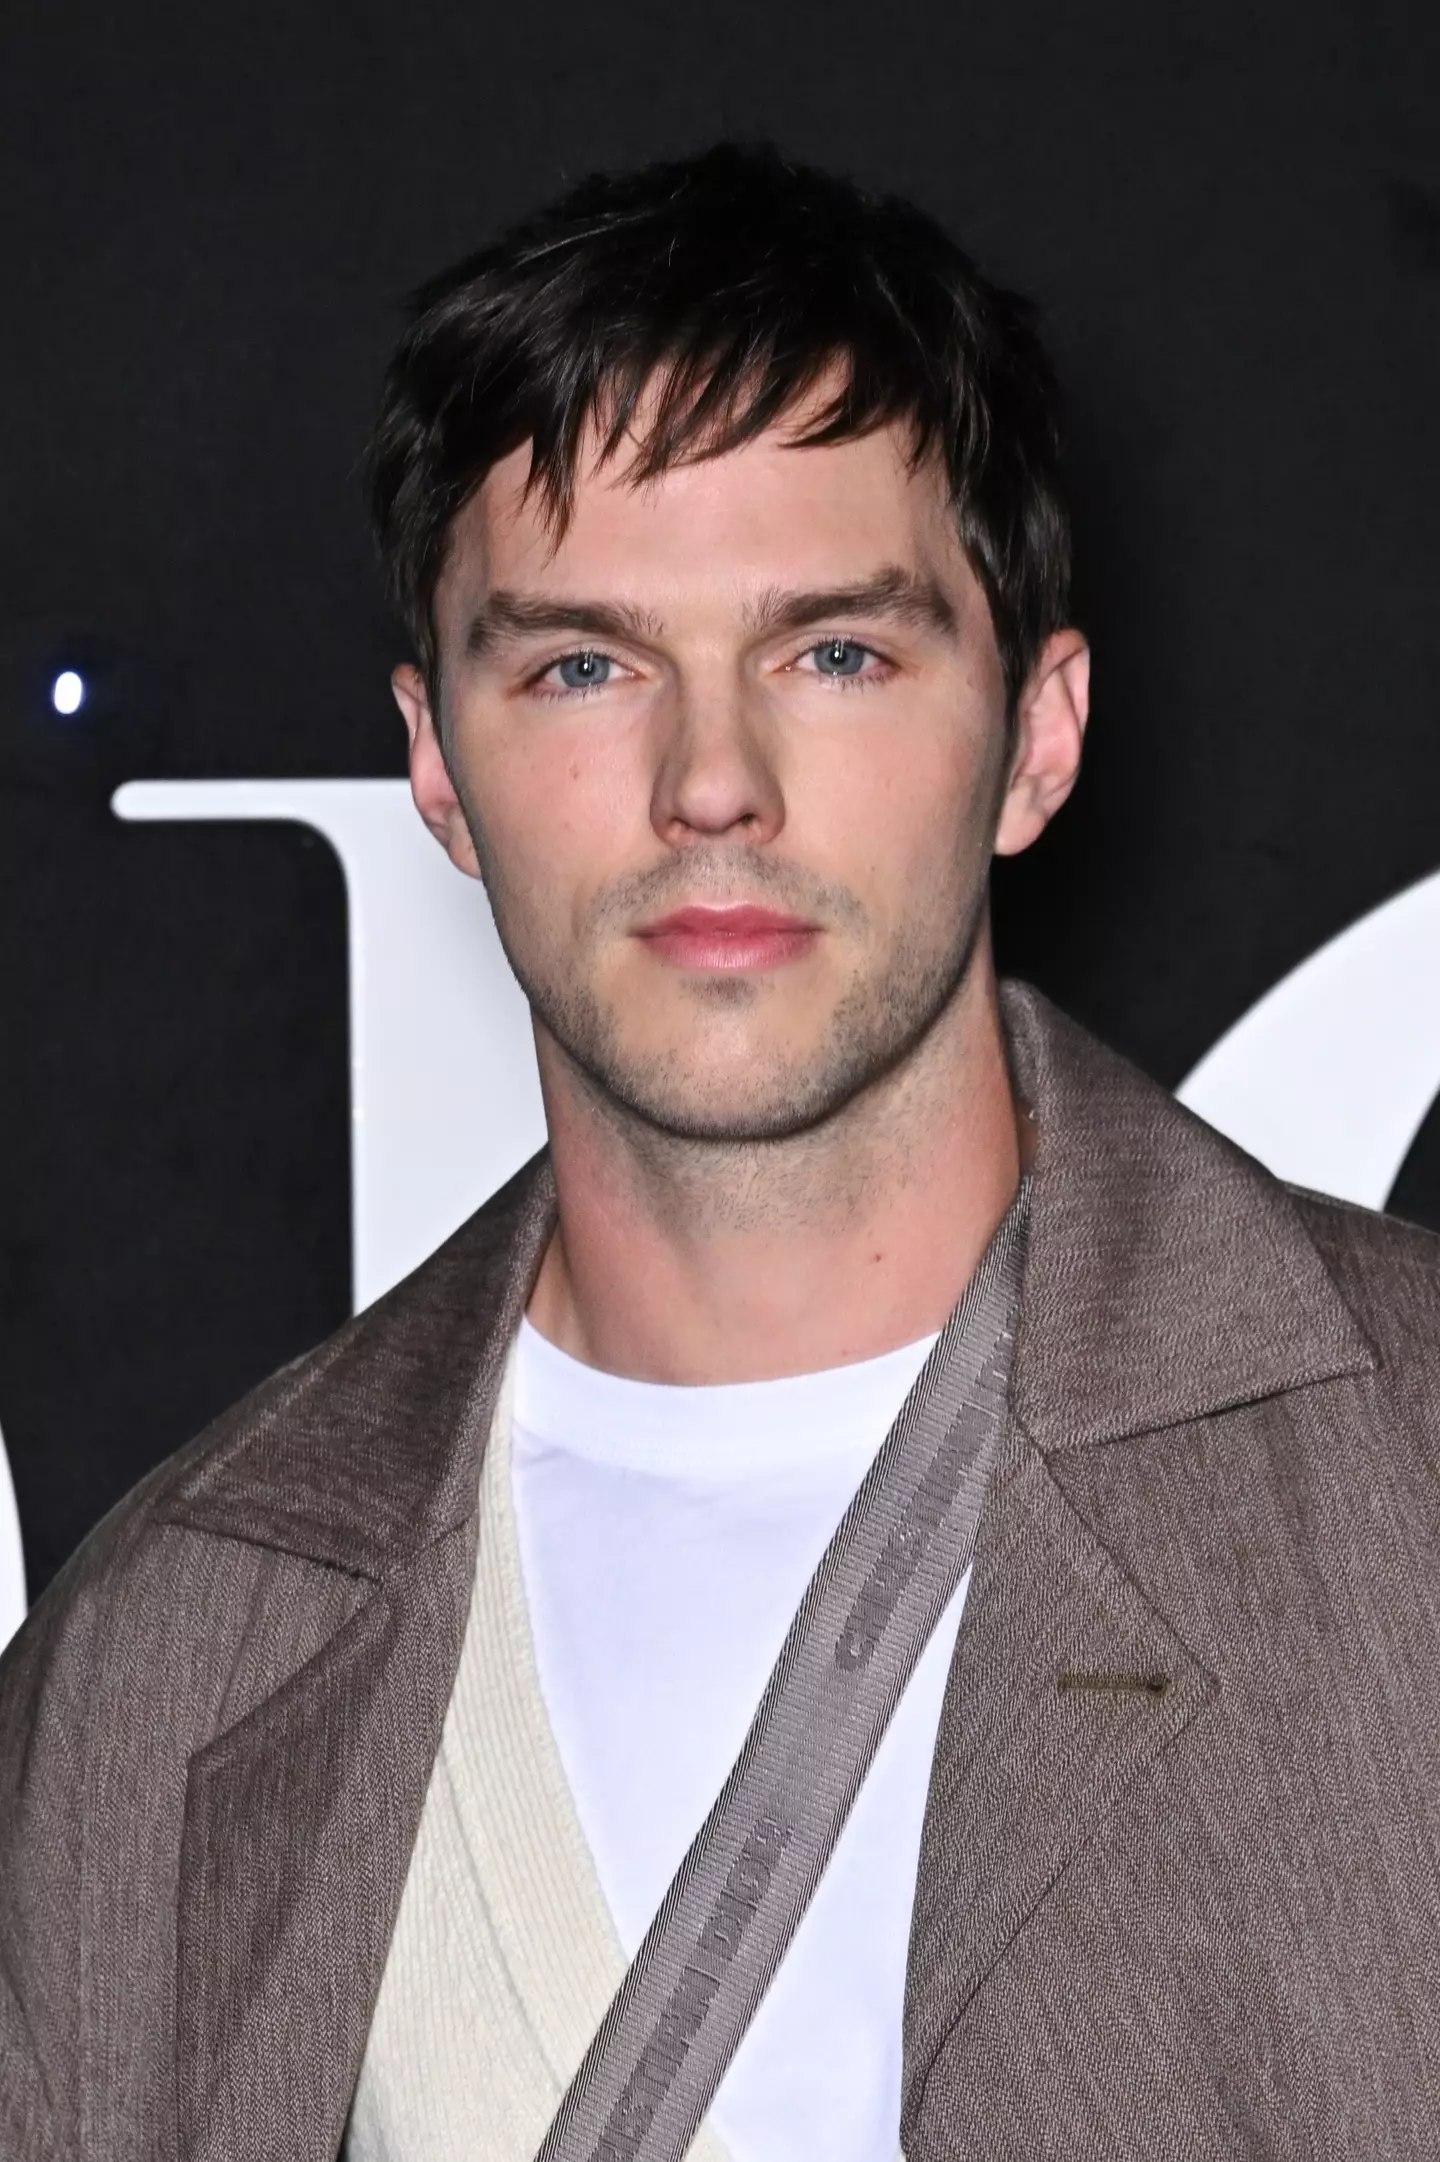 Nicholas Hoult stars in the upcoming flick.